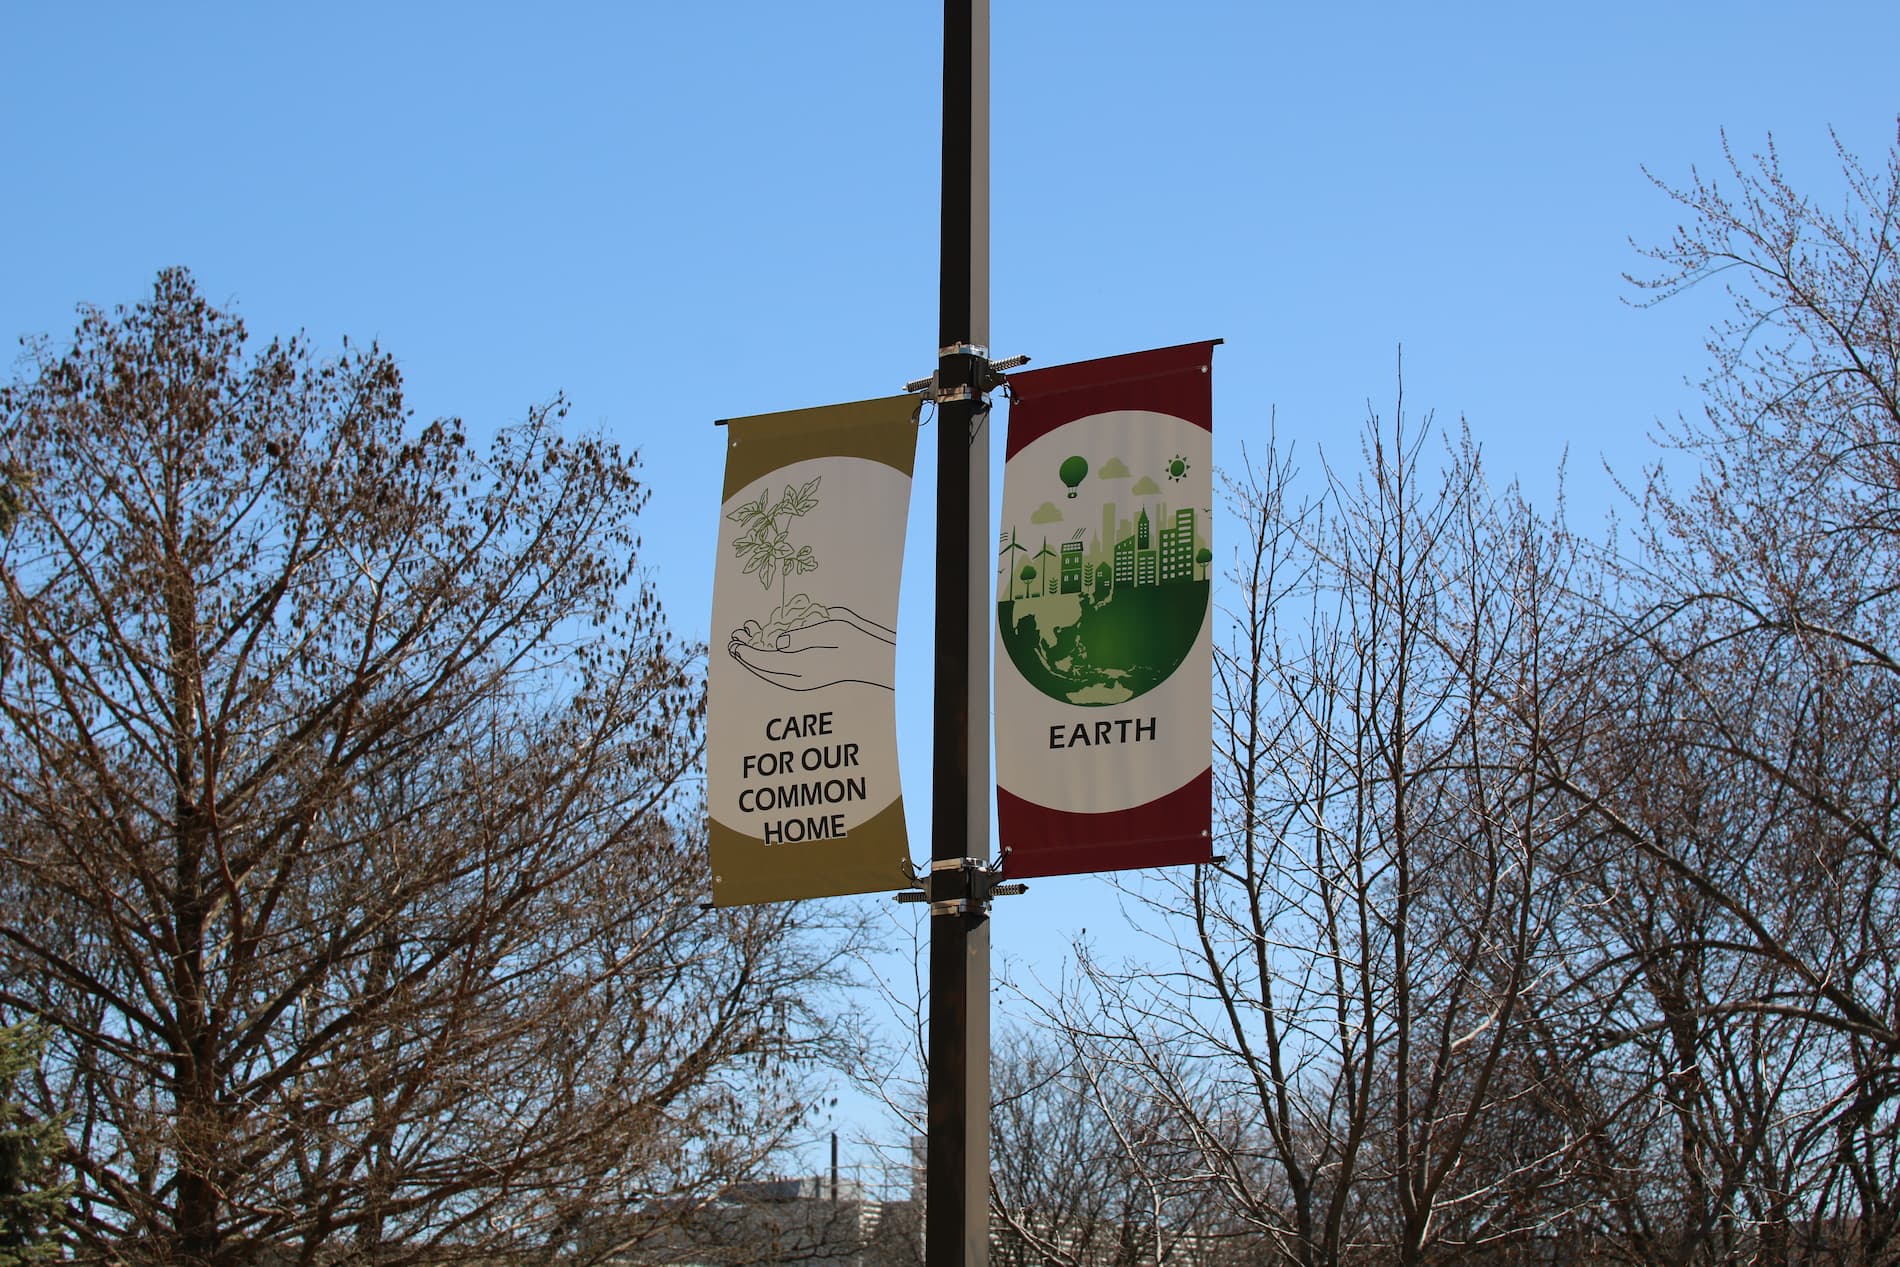 An outdoors photo on the McNichols Campus shows to signs, reading 'Care for Our Common Home' and 'Earth' with trees in the background.